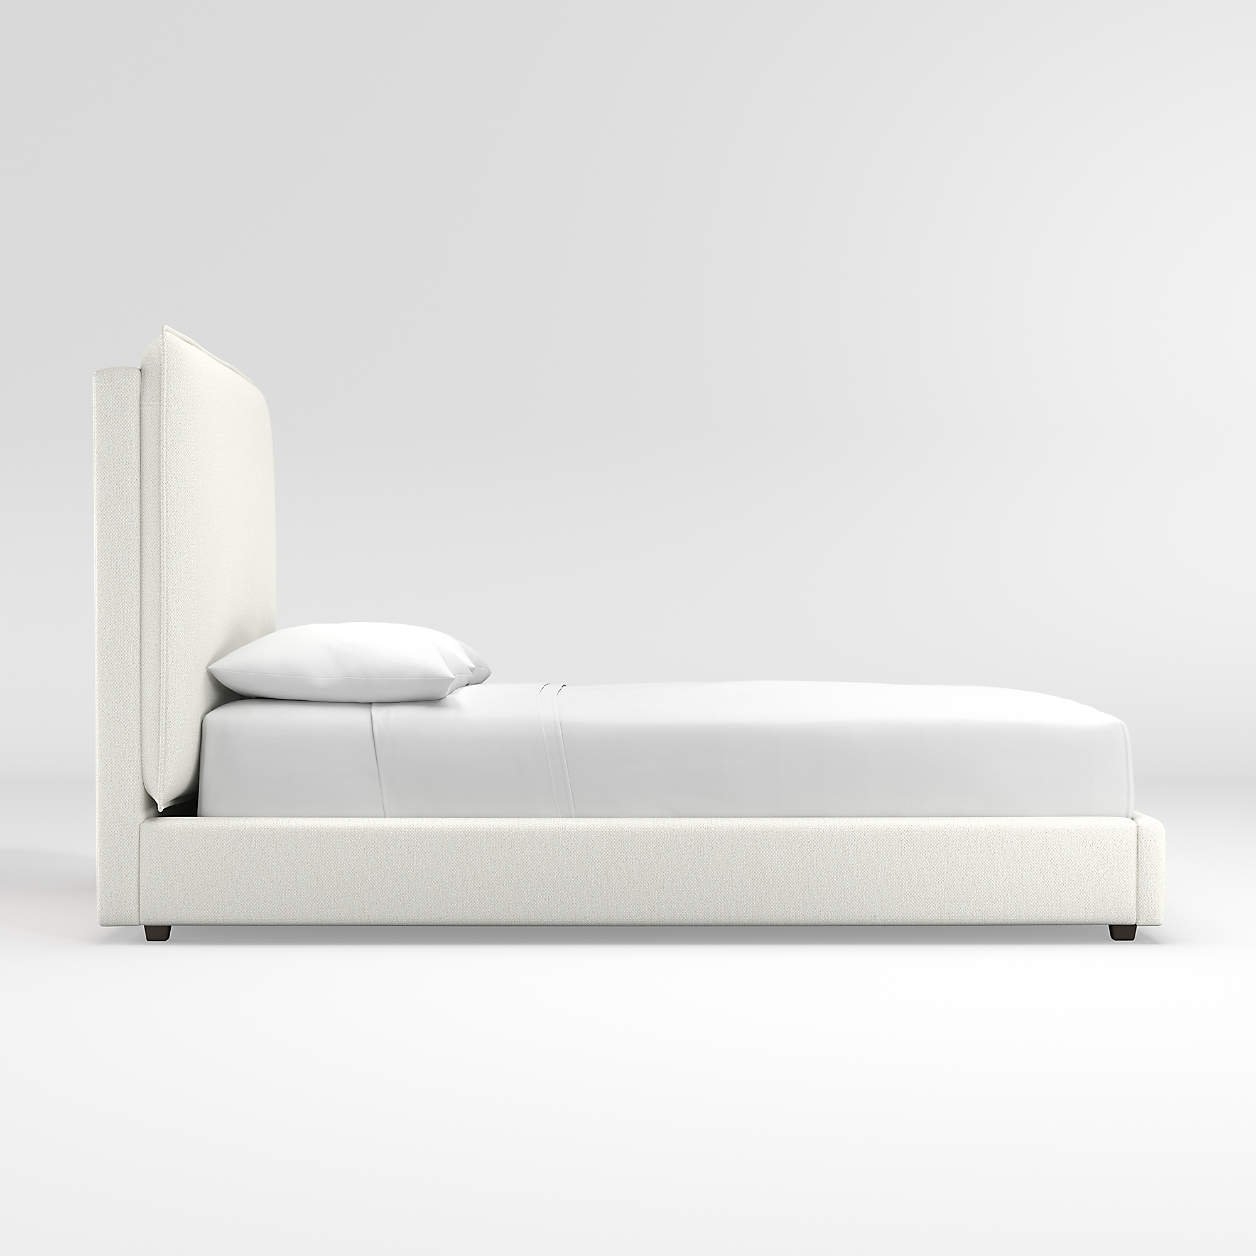 Lotus Upholstered King Bed with 53.5" Headboard - Image 2